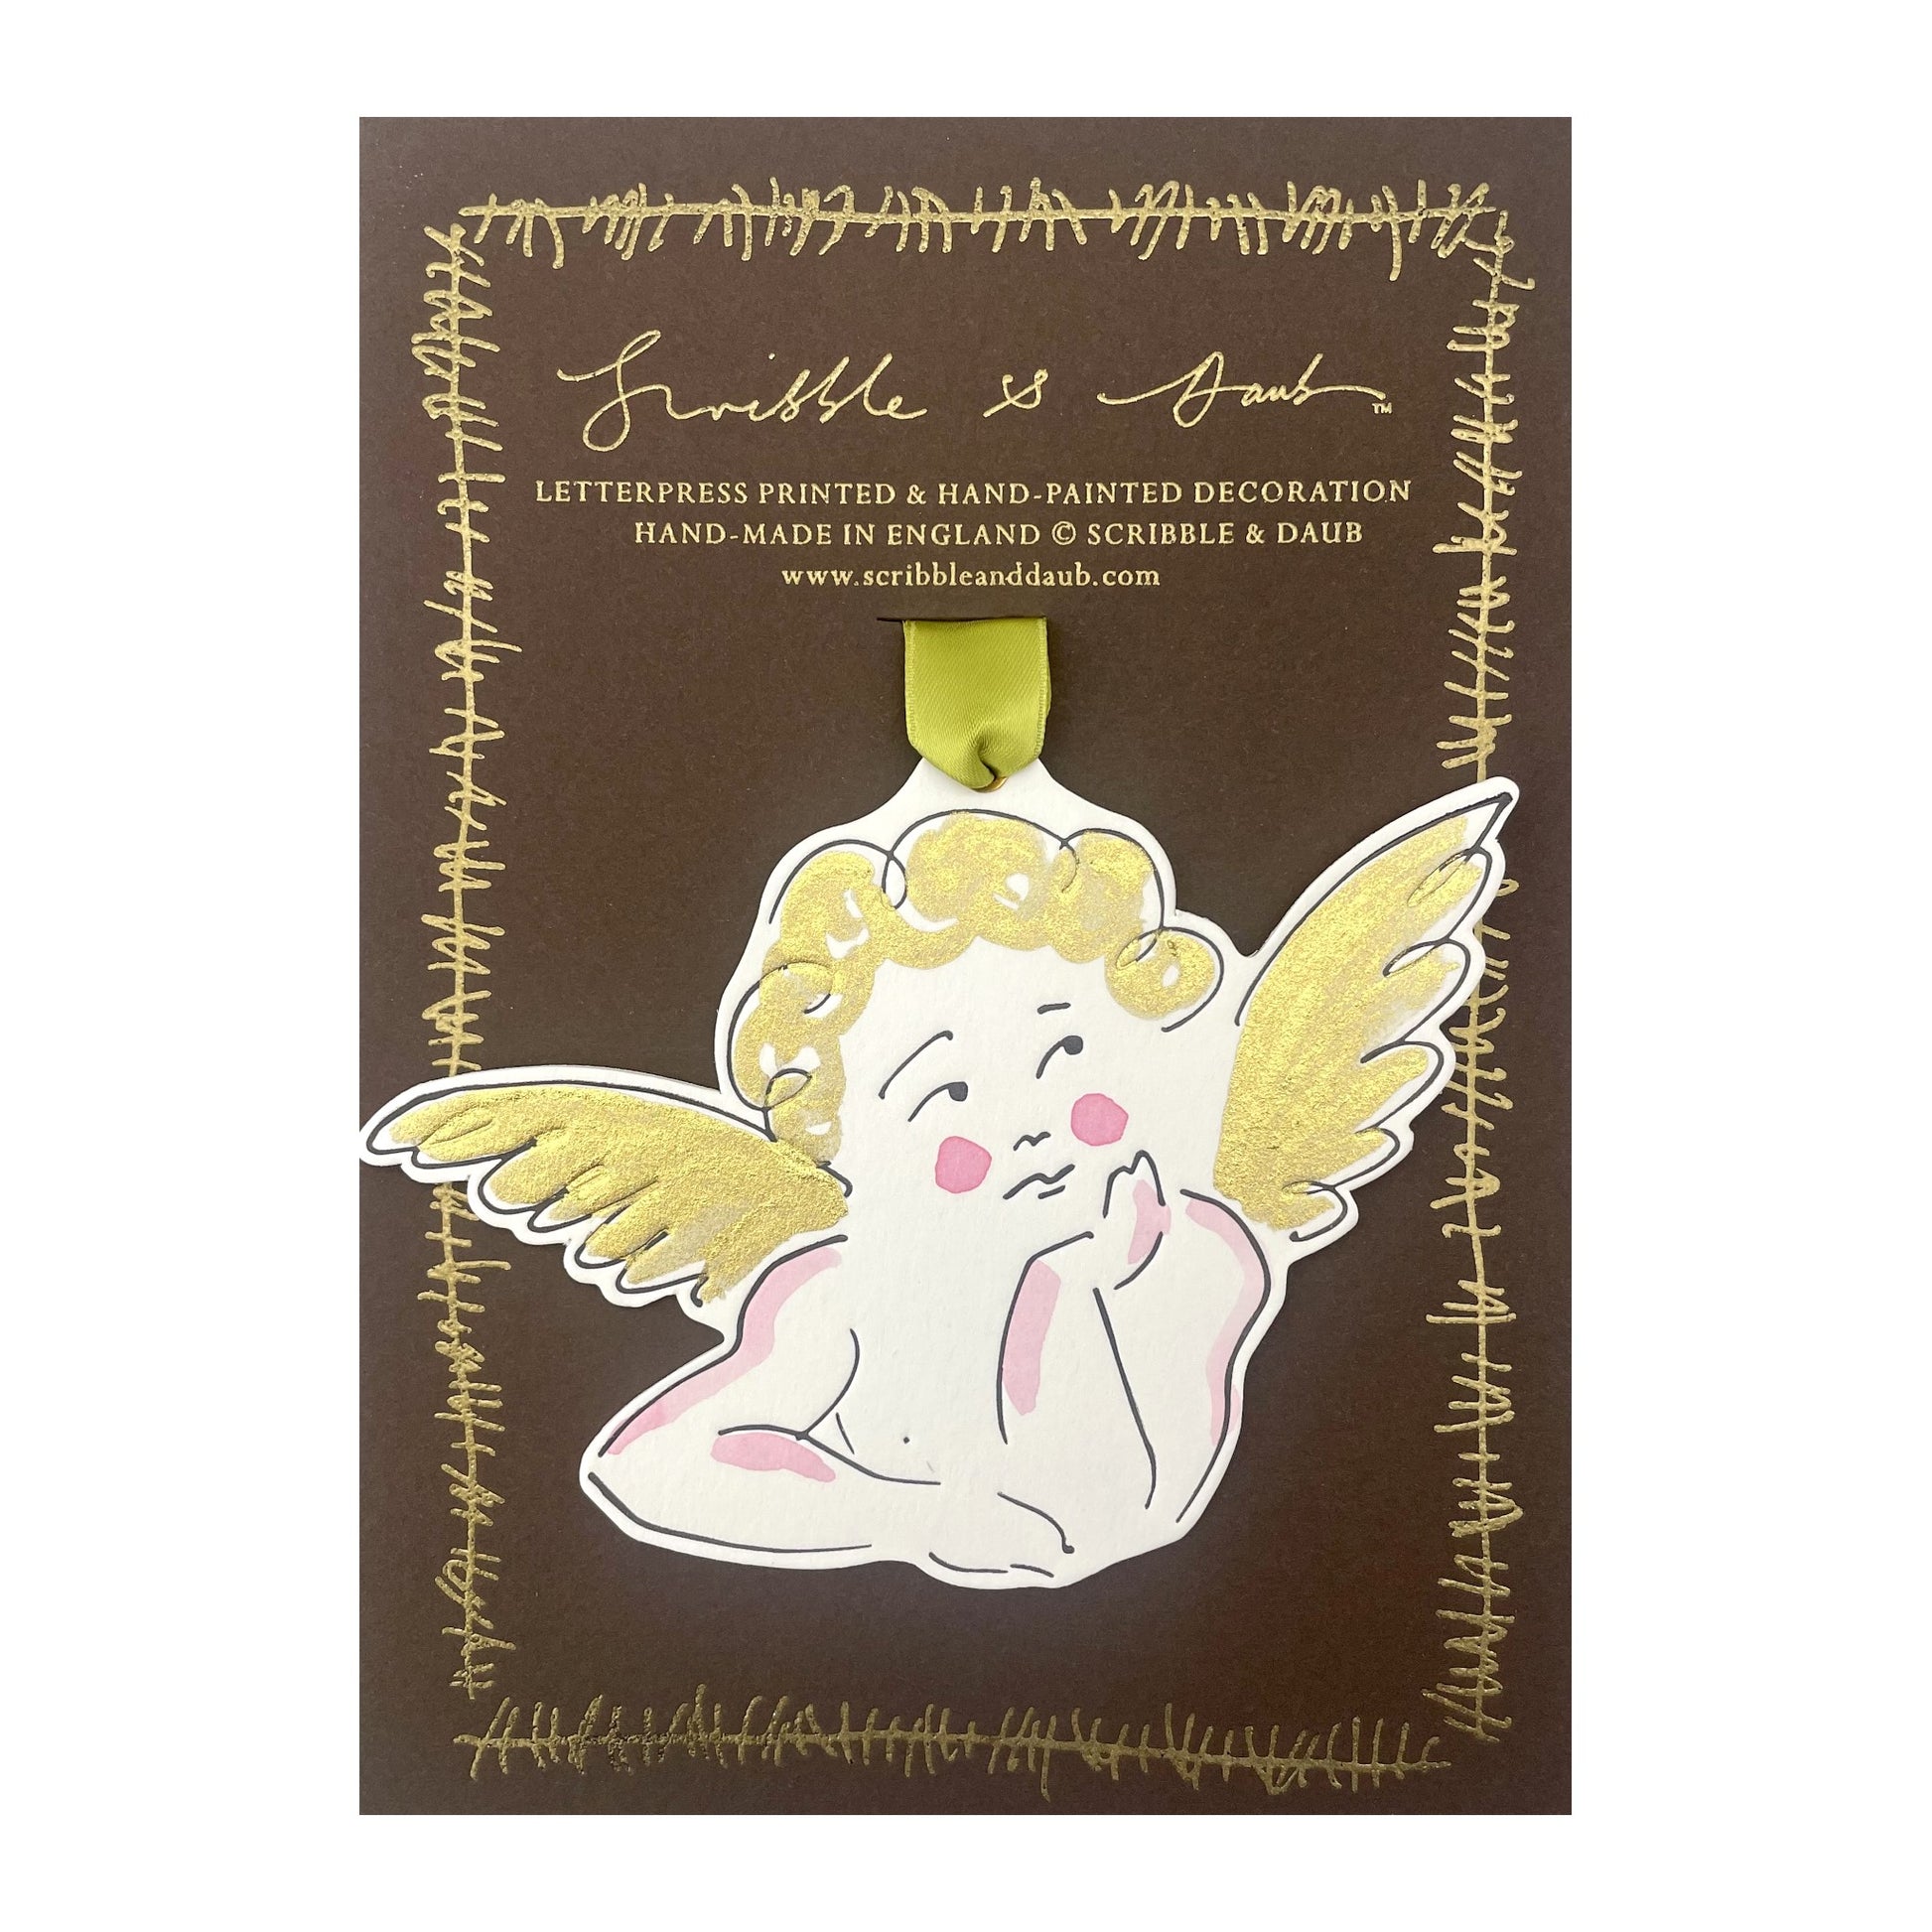 a cherub shaped hanging ornament made of thick 1050gsm off-white card, letterpress printed in black and then hand painted in pale pink and gold ink. It has a chartreuse green satin ribbon to hang the ornament with. By Scribble & Daub. Pictured on a gold-foiled brown board.